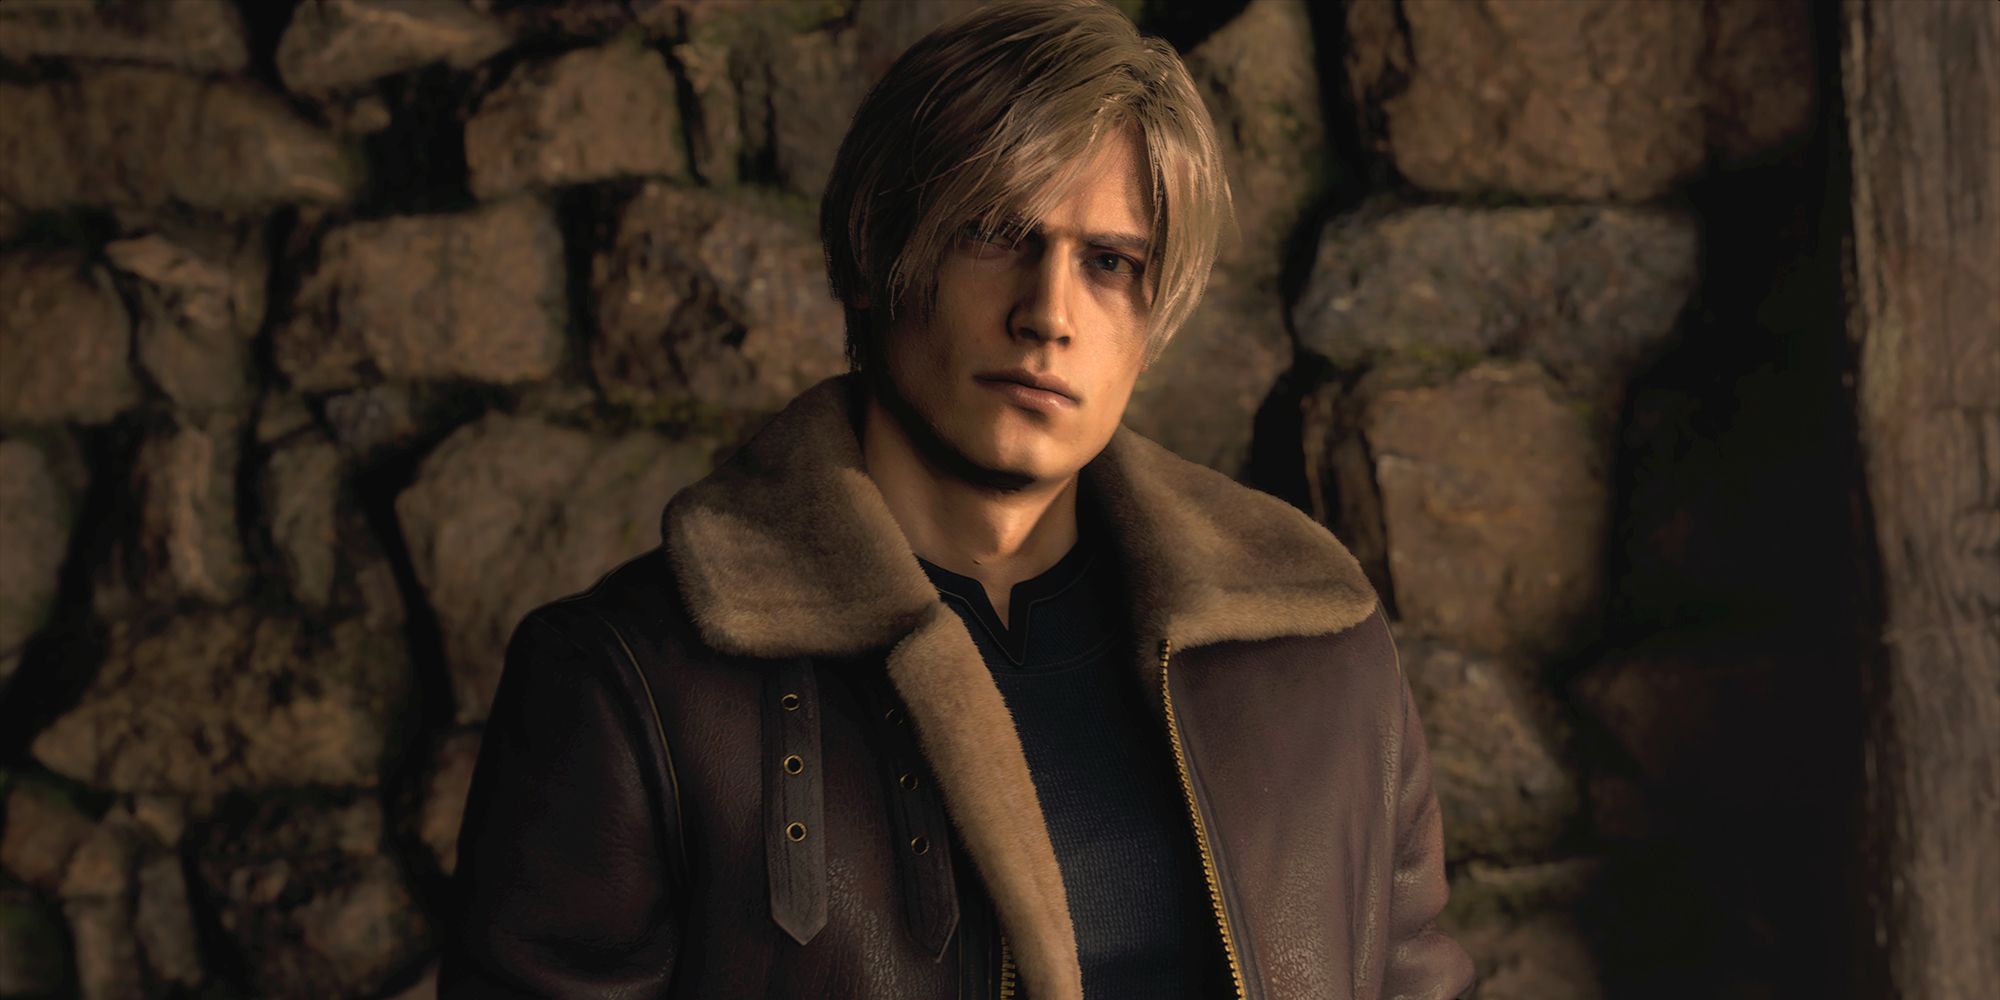 Resident Evil 4 Remake PC Requirements